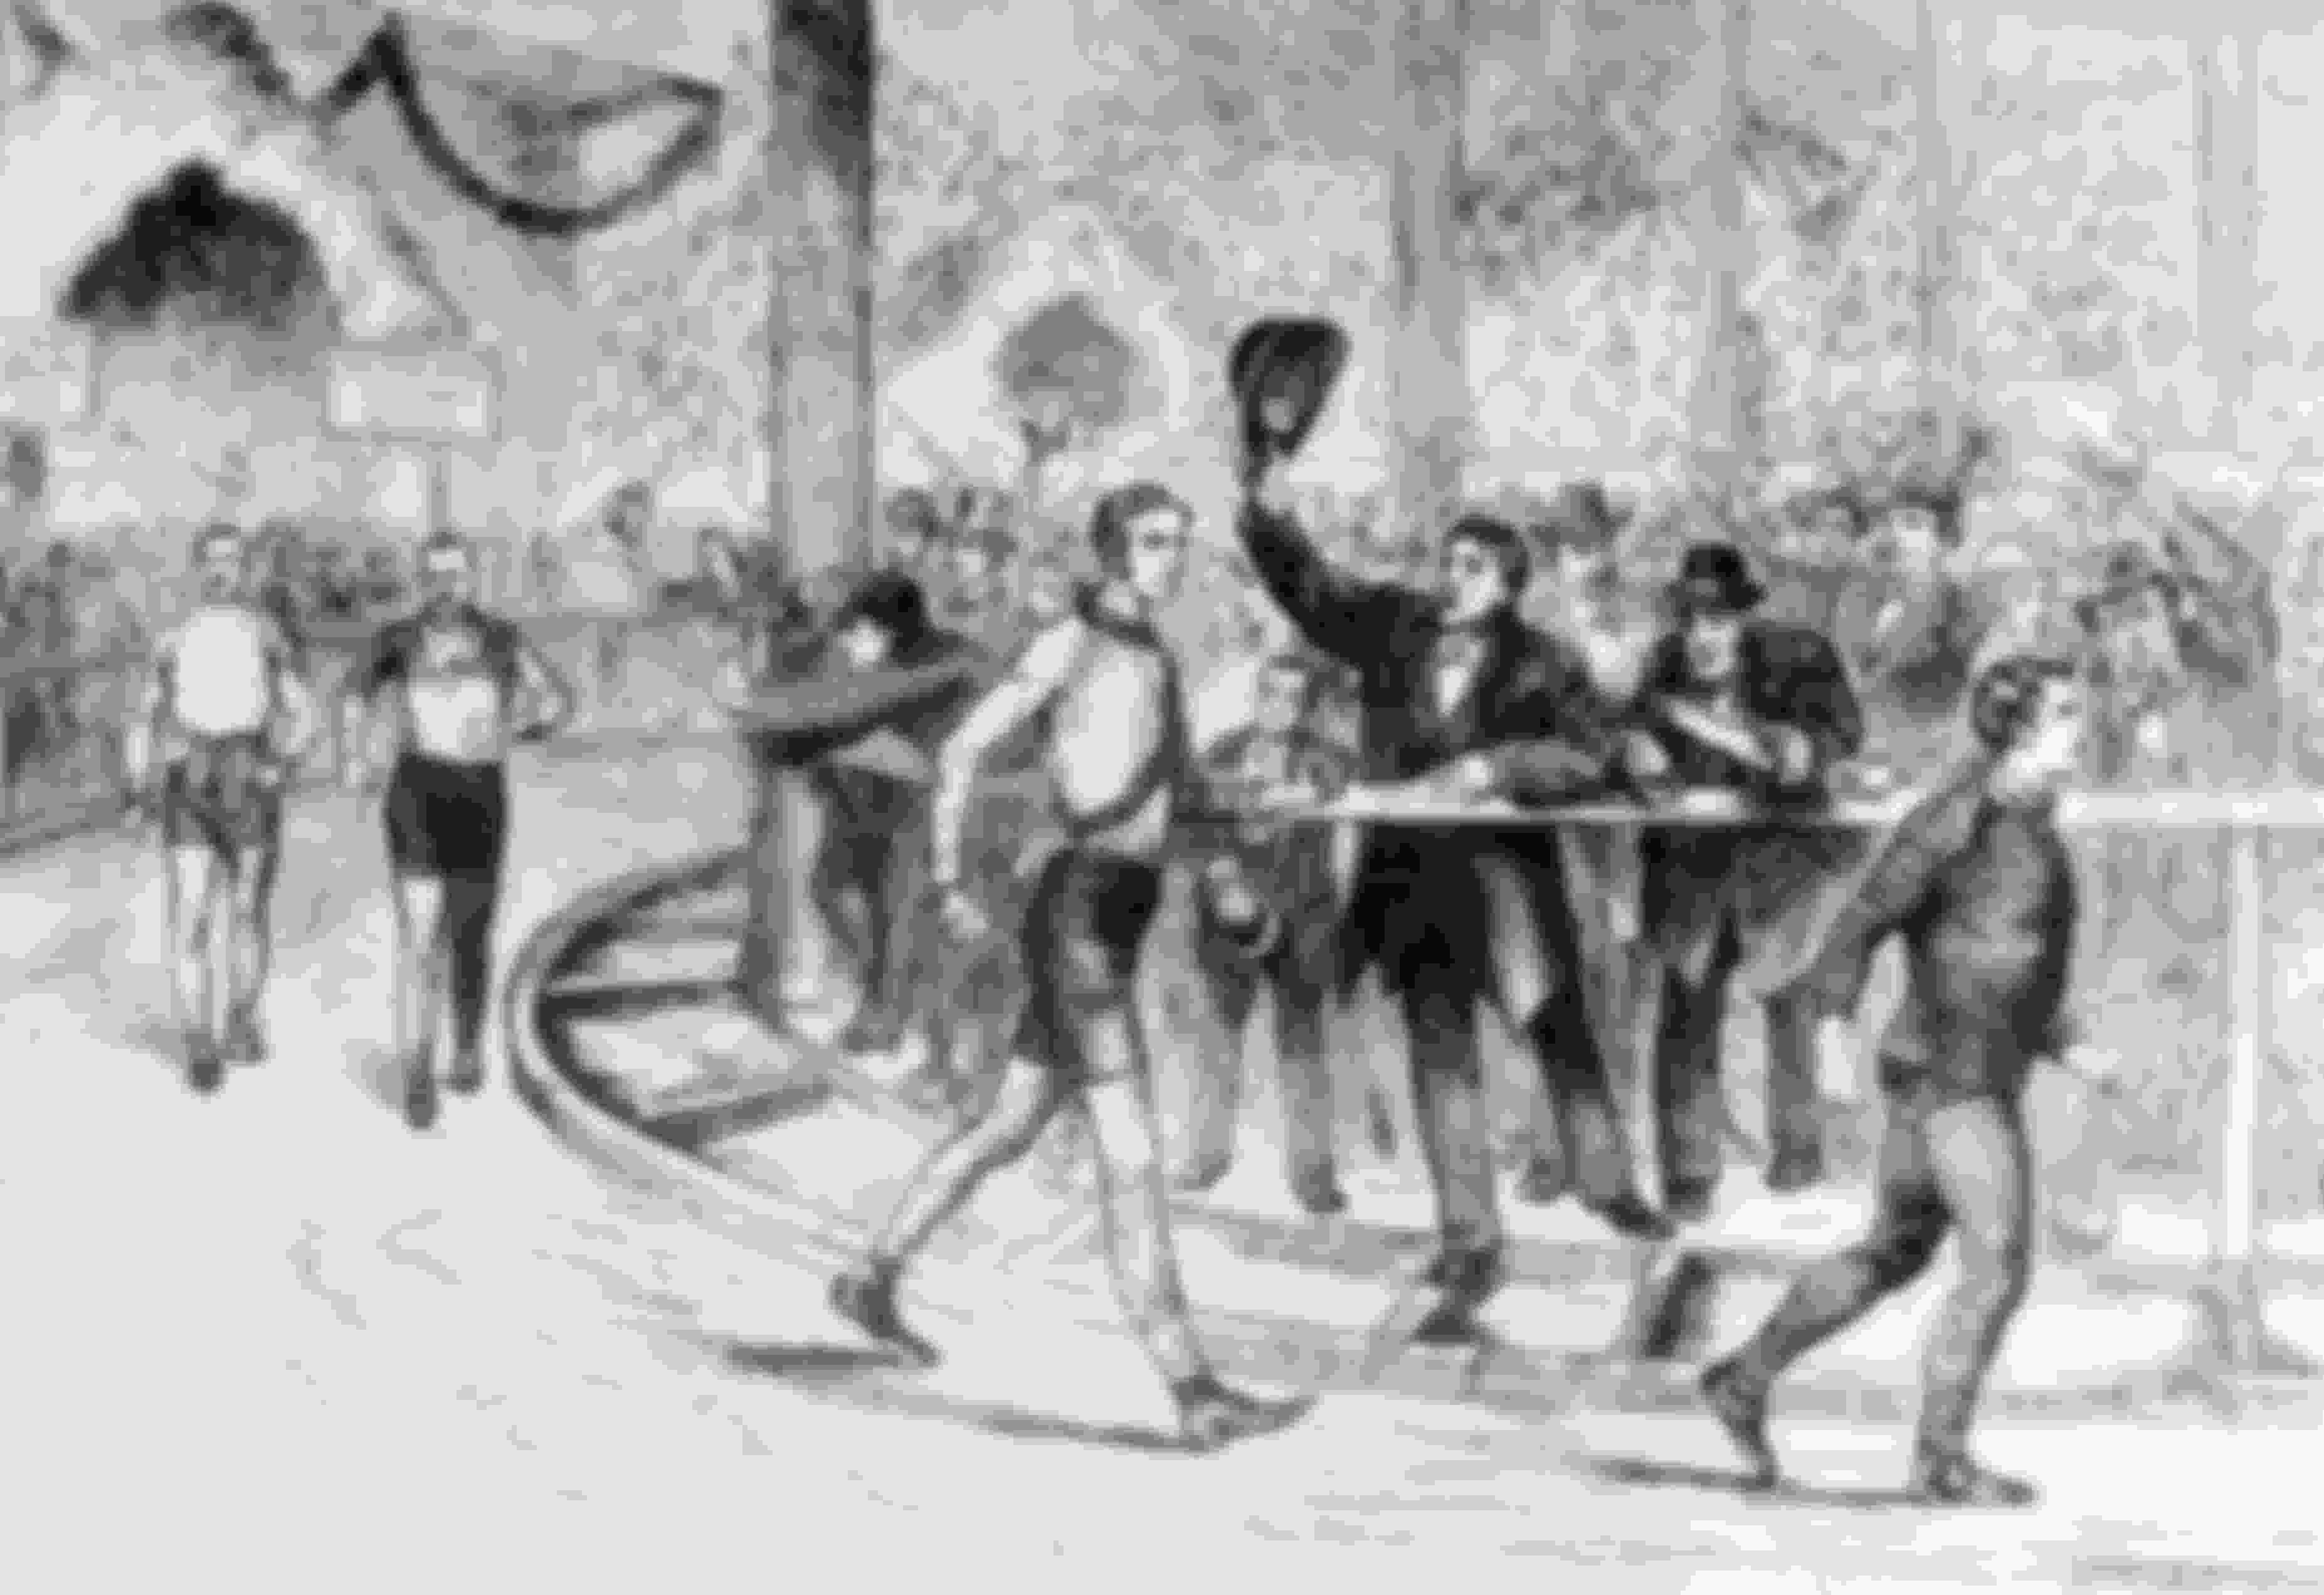 Crowds watch participants competing in a six-day walking race at Gilmore's Garden, New York City in March 1879.